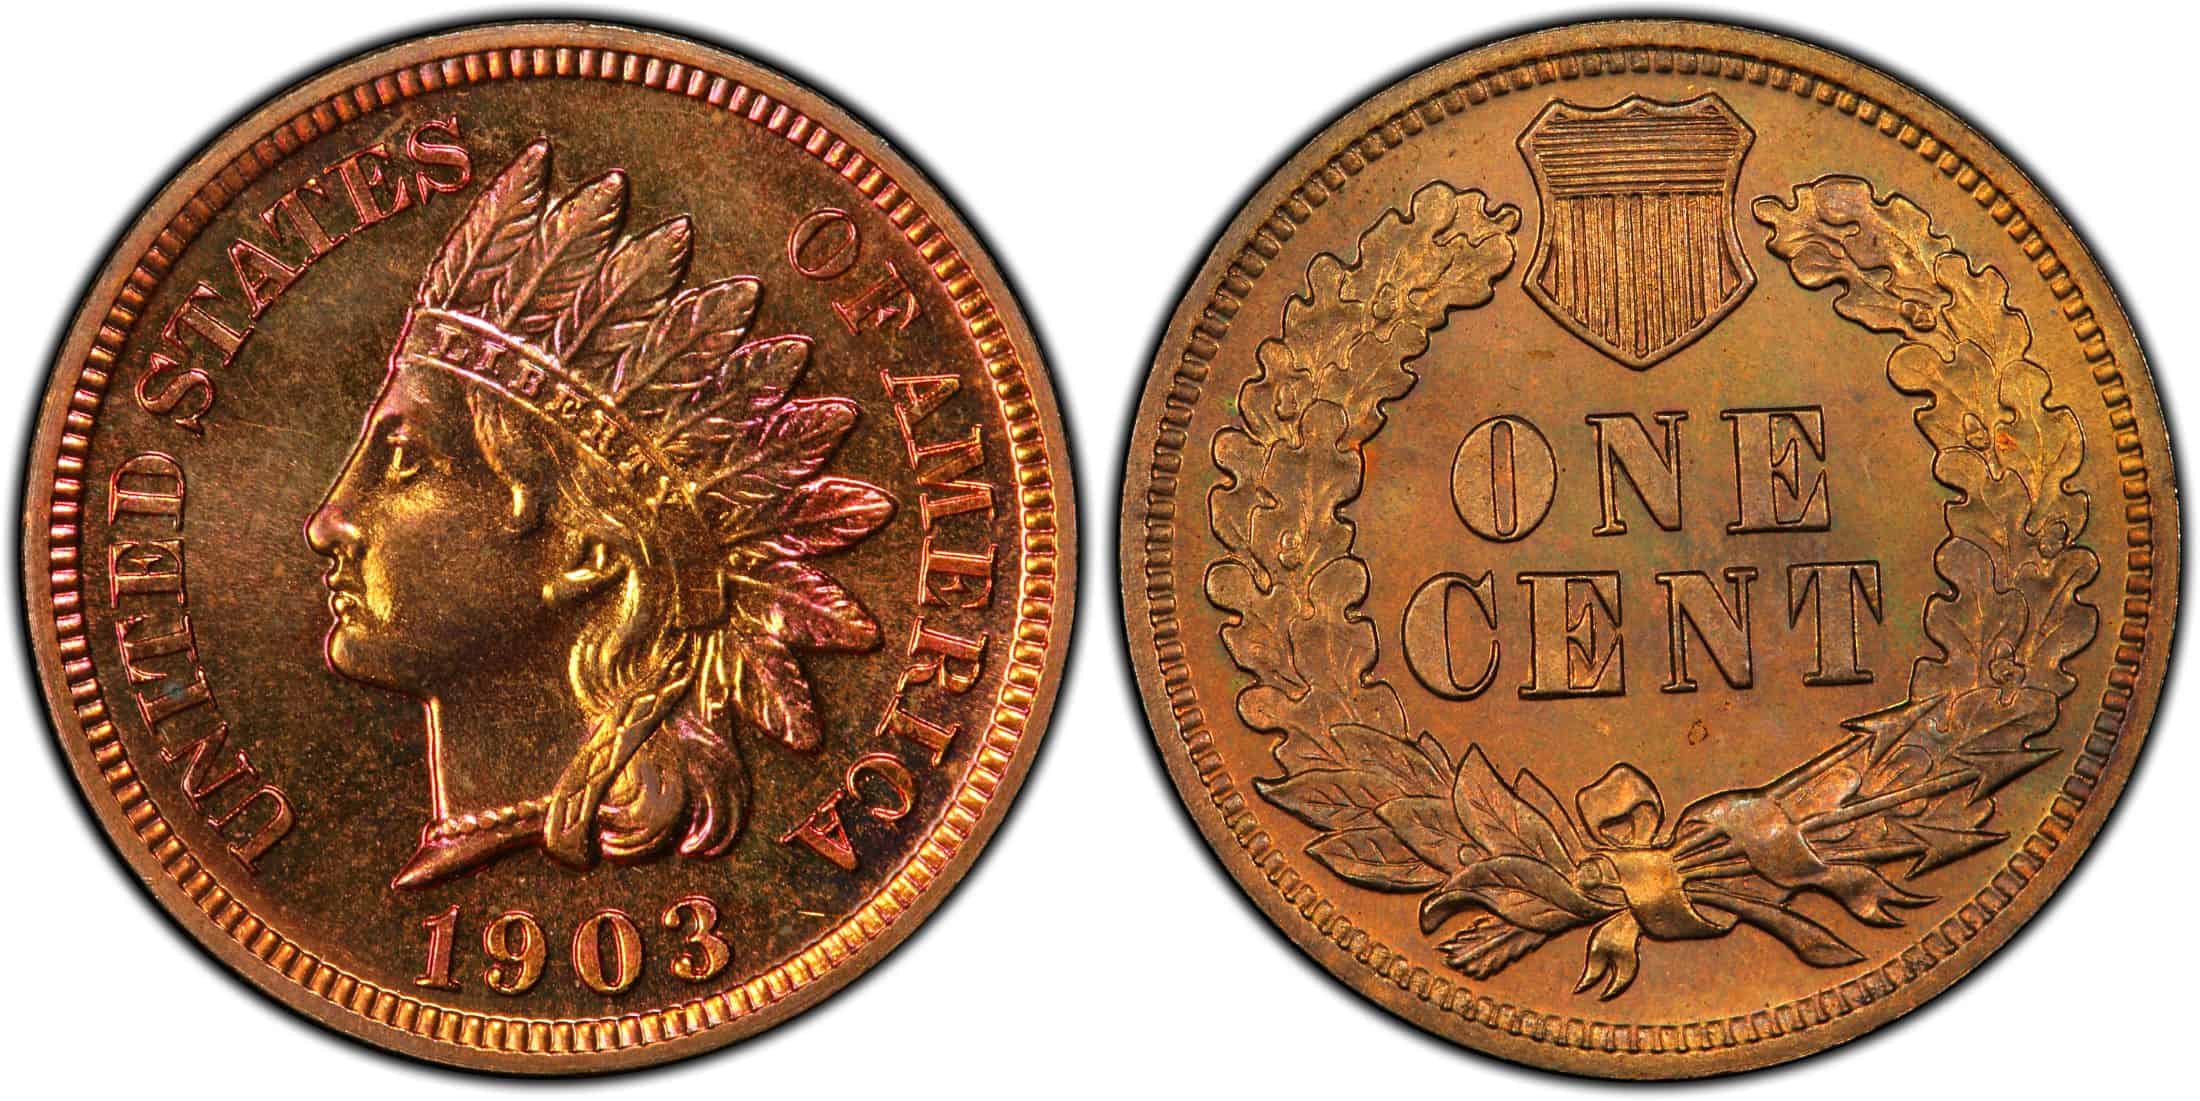 1903 (P) Proof Indian Head Penny Value